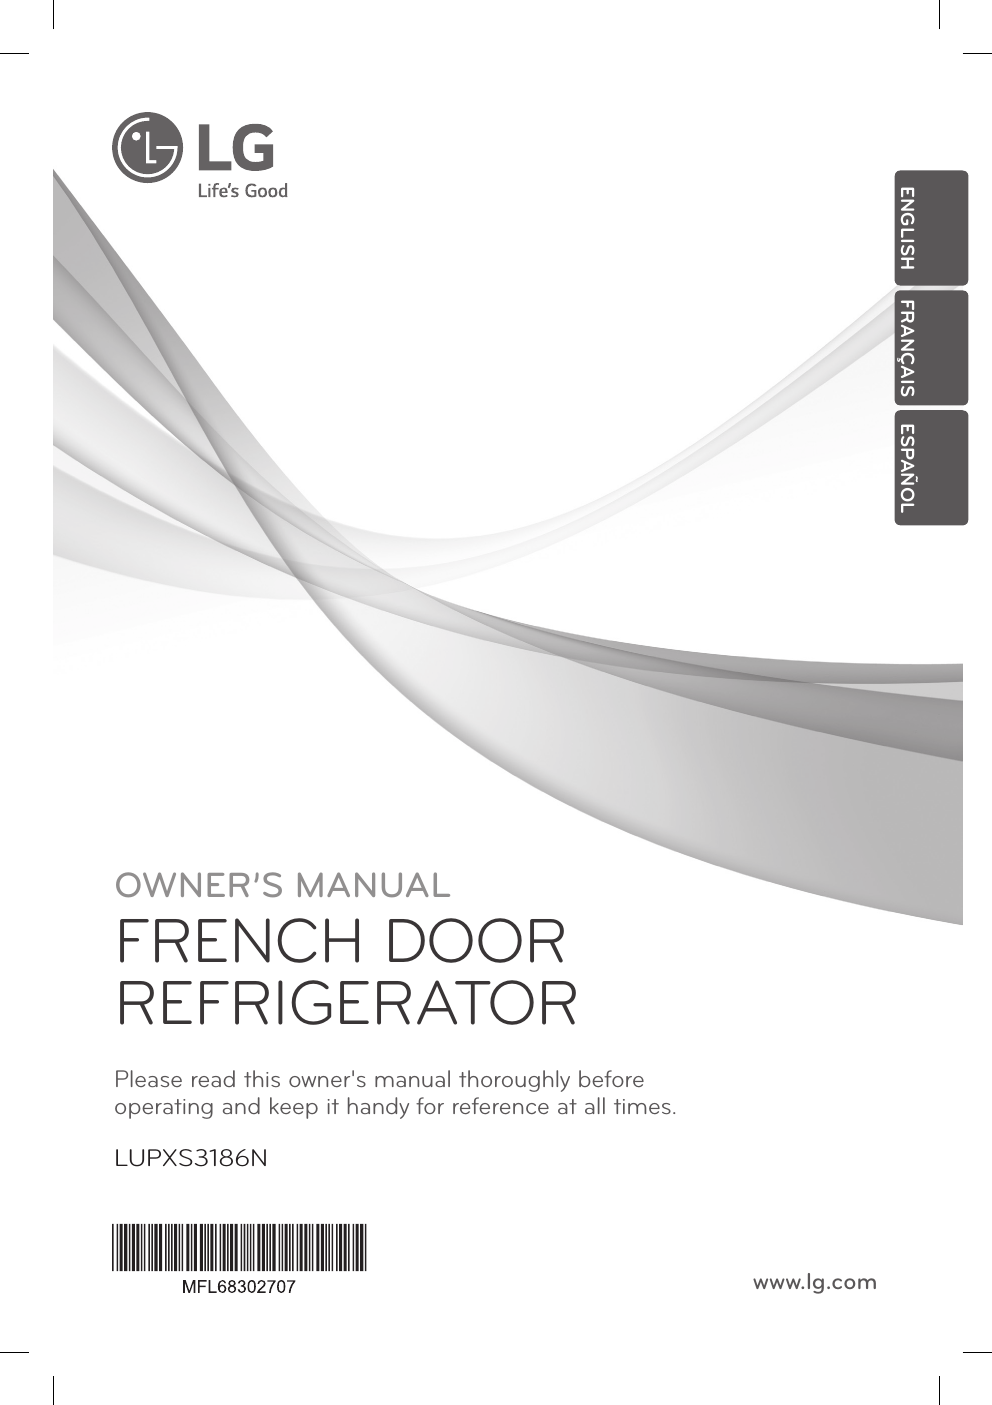 OWNER’S MANUALFRENCH DOOR REFRIGERATORPlease read this owner&apos;s manual thoroughly before  operating and keep it handy for reference at all times.LUPXS3186Nwww.lg.comENGLISH FRANÇAIS ESPAÑOL